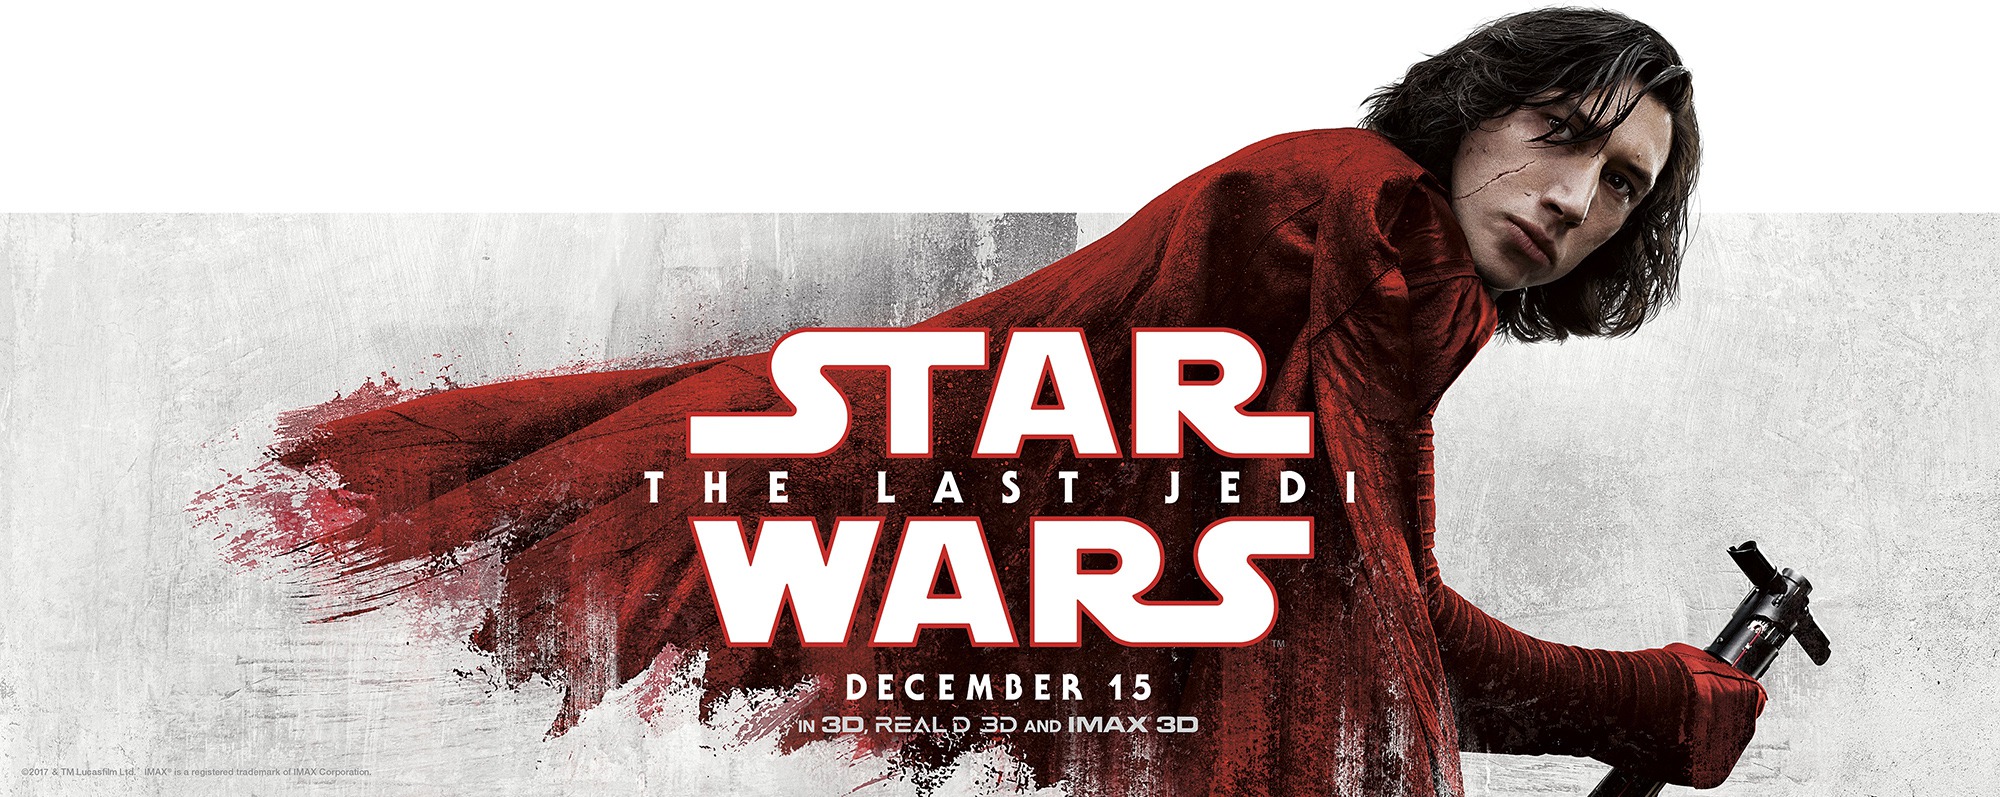 Mega Sized Movie Poster Image for Star Wars: The Last Jedi (#63 of 67)